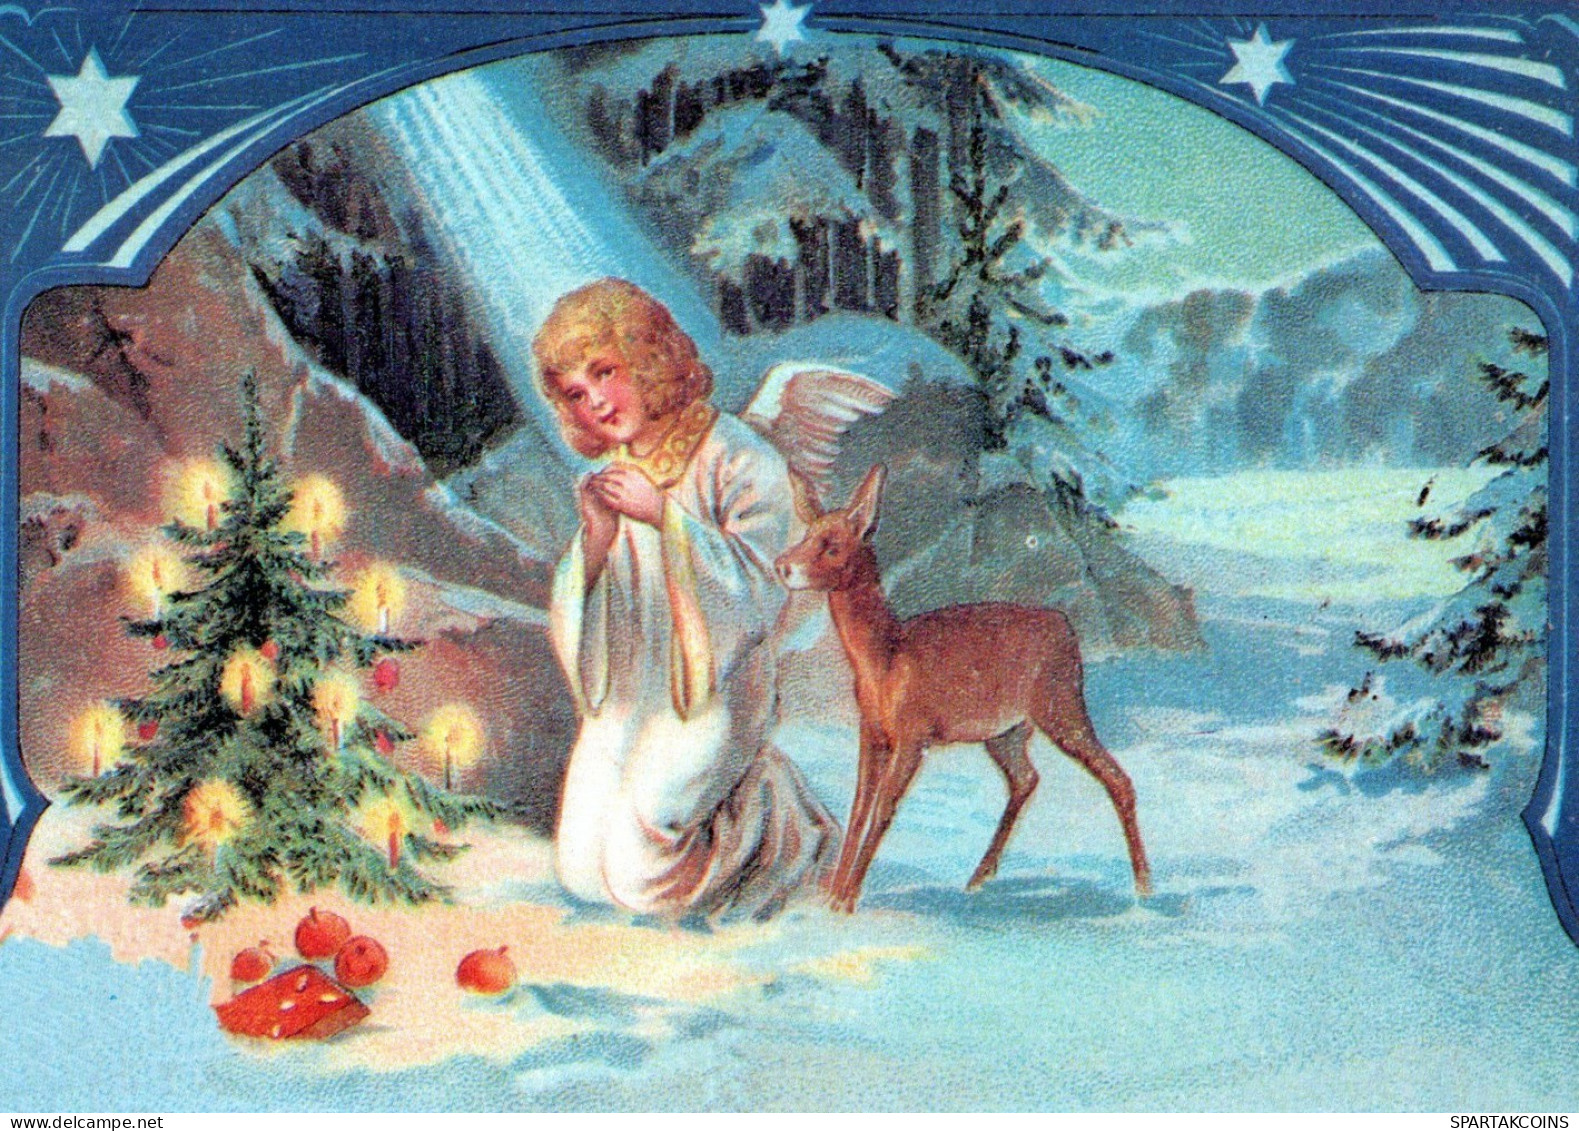 ANGELO Buon Anno Natale Vintage Cartolina CPSM #PAH079.IT - Angels